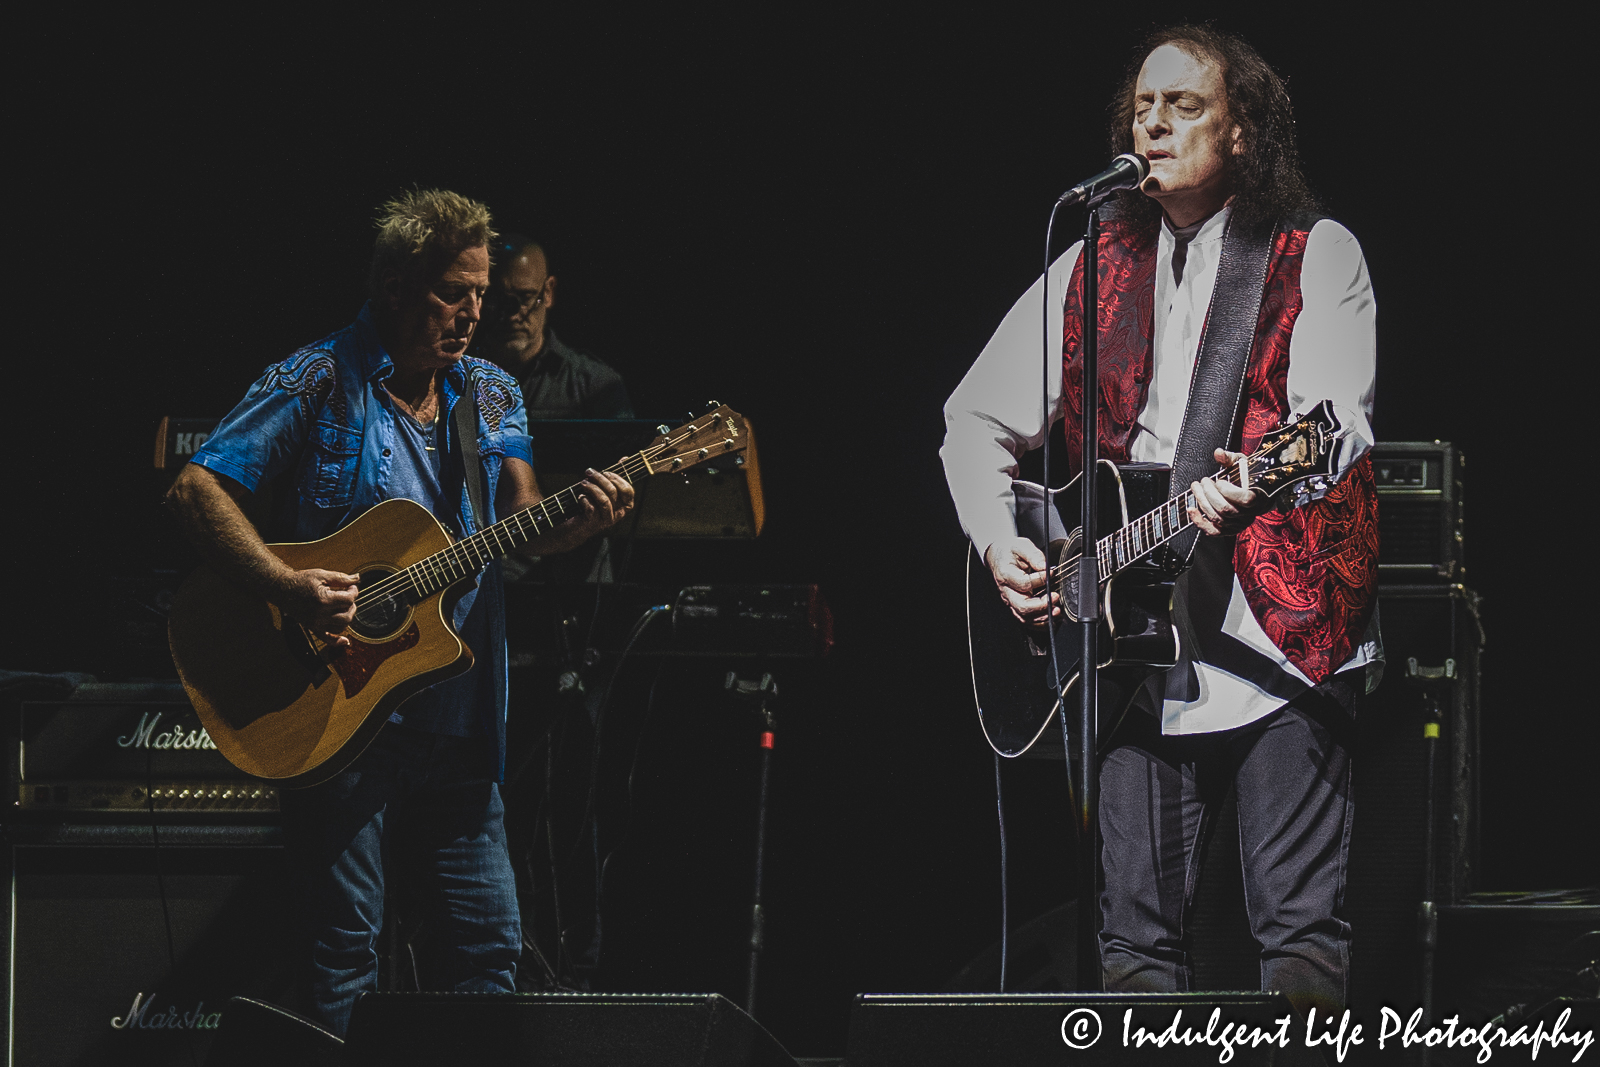 Tommy James & The Shondells performing an acoustic rendition of "I Think We're Alone Now" at Muriel Kauffman Theatre in Kansas City, MO on April 1, 2023.